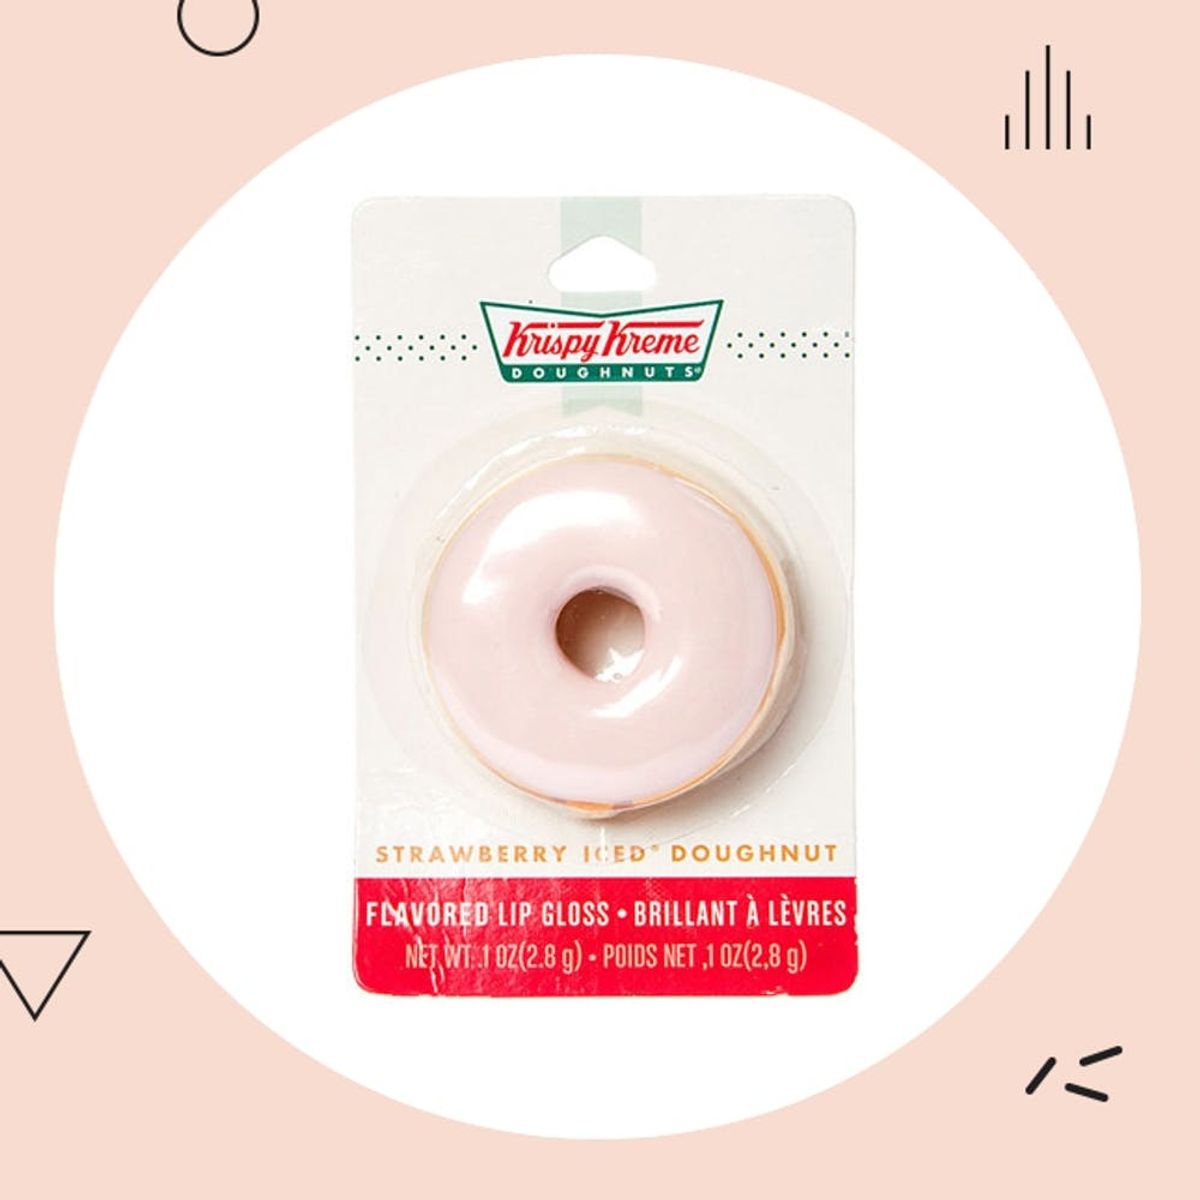 How to Get Your Krispy Kreme Fix Without Eating a Single Calorie